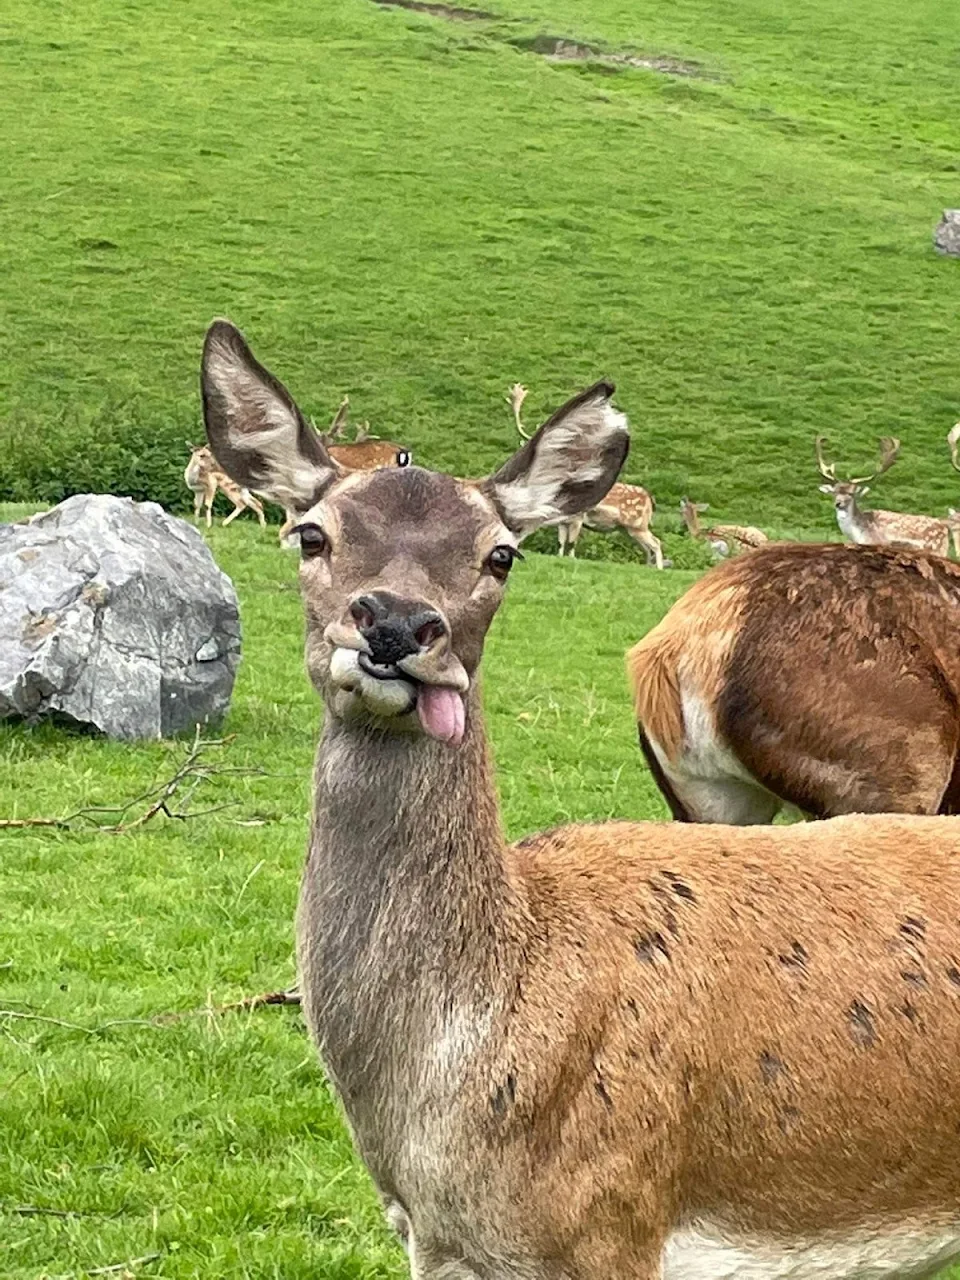 Today in our local zoo - the uber derpy deer